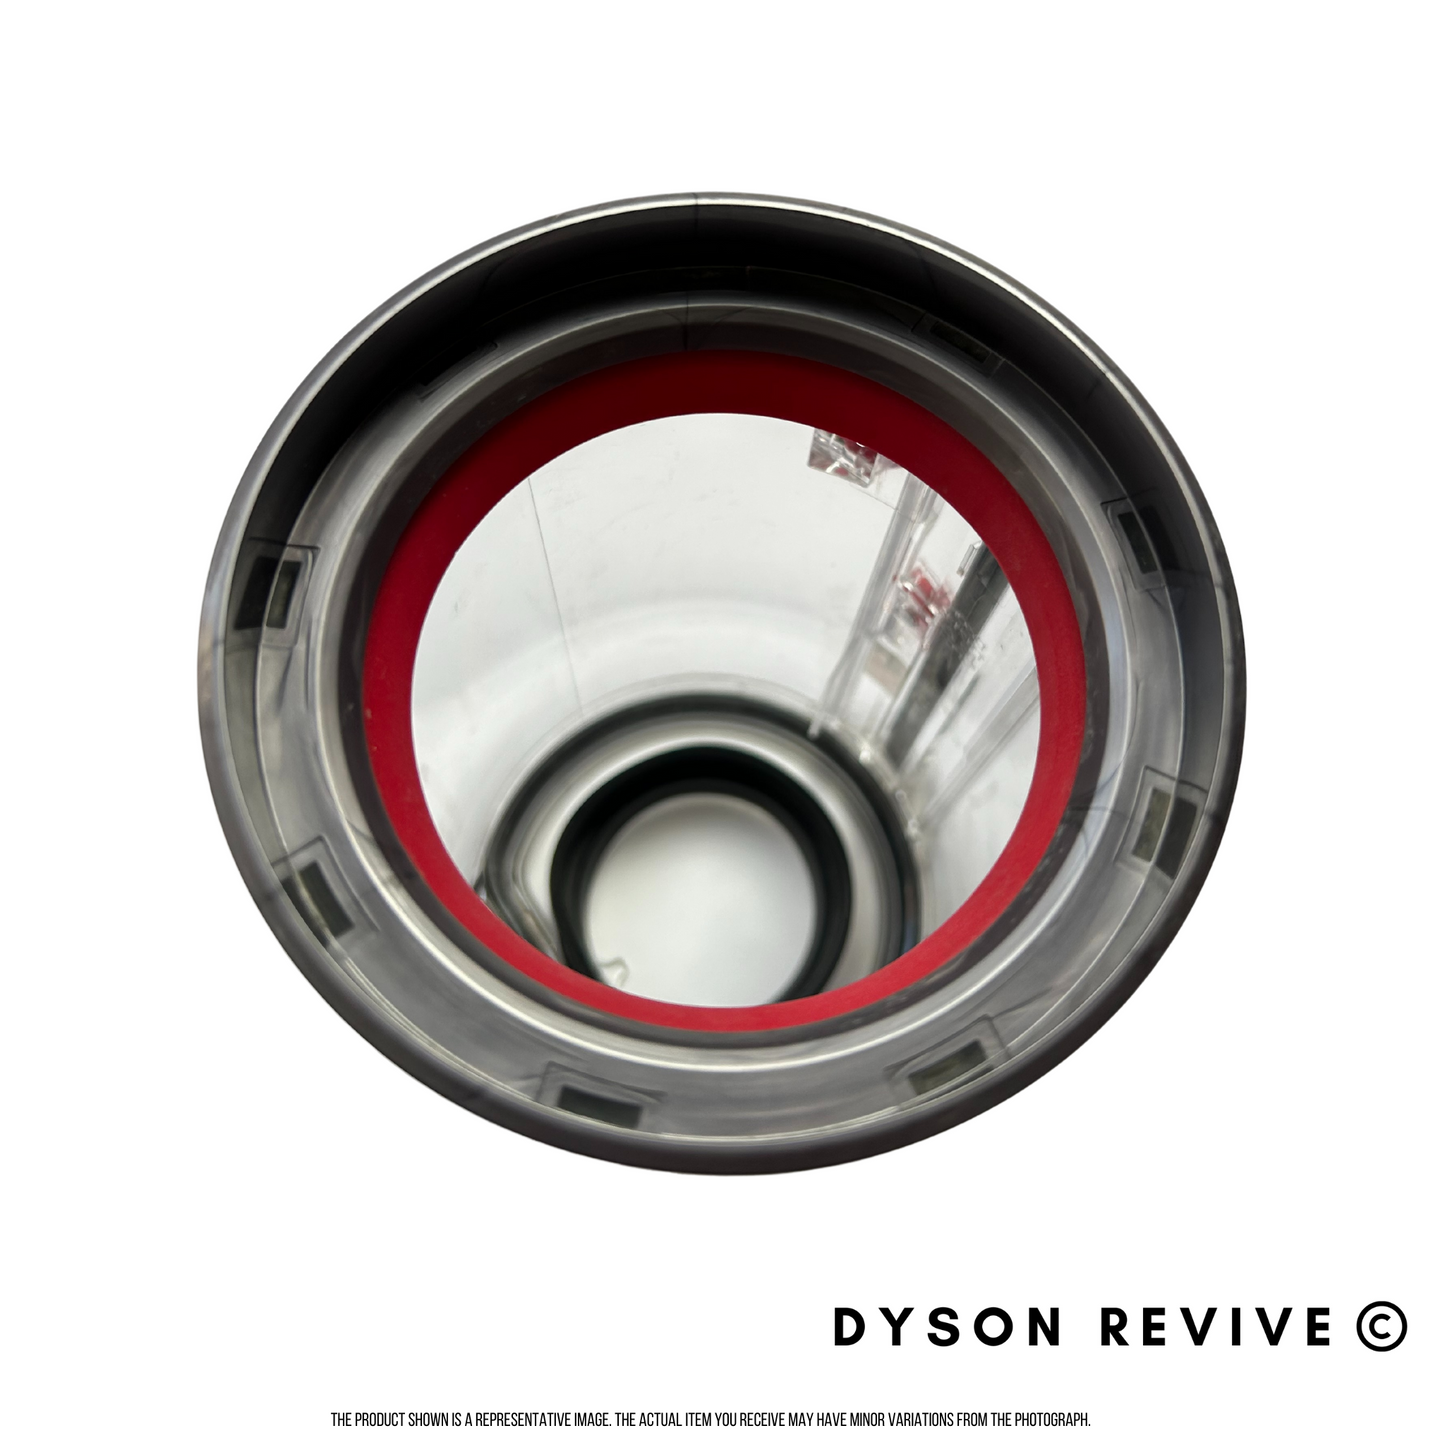 Geniune Dyson Dustbin Canister for Dyson V11 Vaccuum - Refurbished